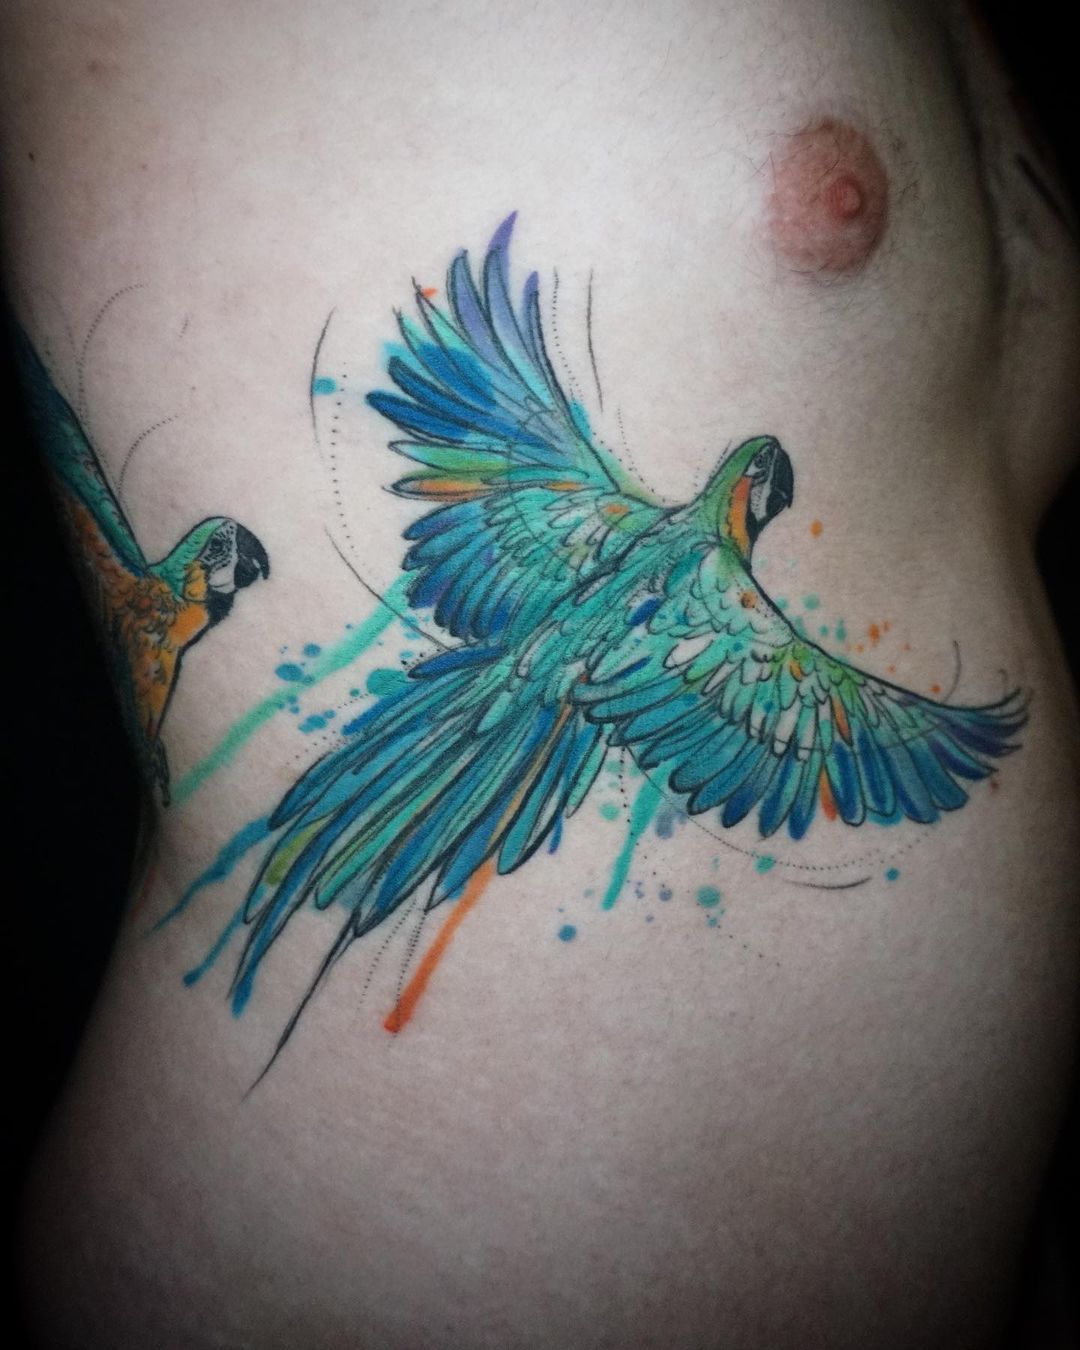 30 Adorable Parrot Tattoo Designs You will Love | Art and Design | Parrot  tattoo, Tattoo designs, Picture tattoos